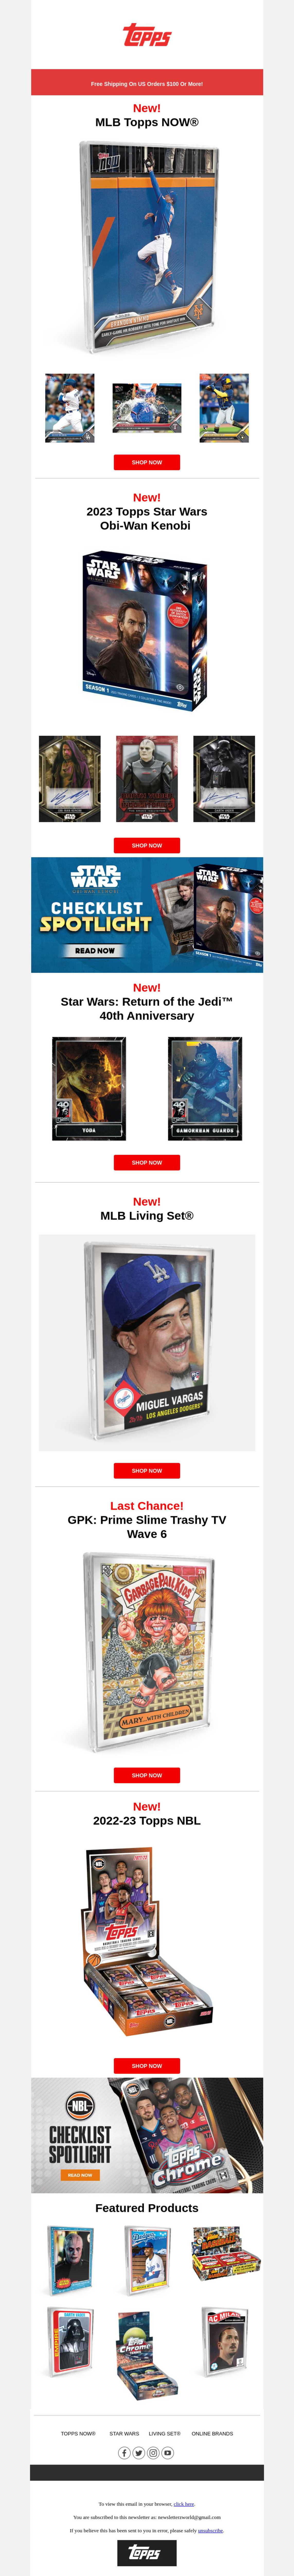 Just Launched: MLB Topps NOW!